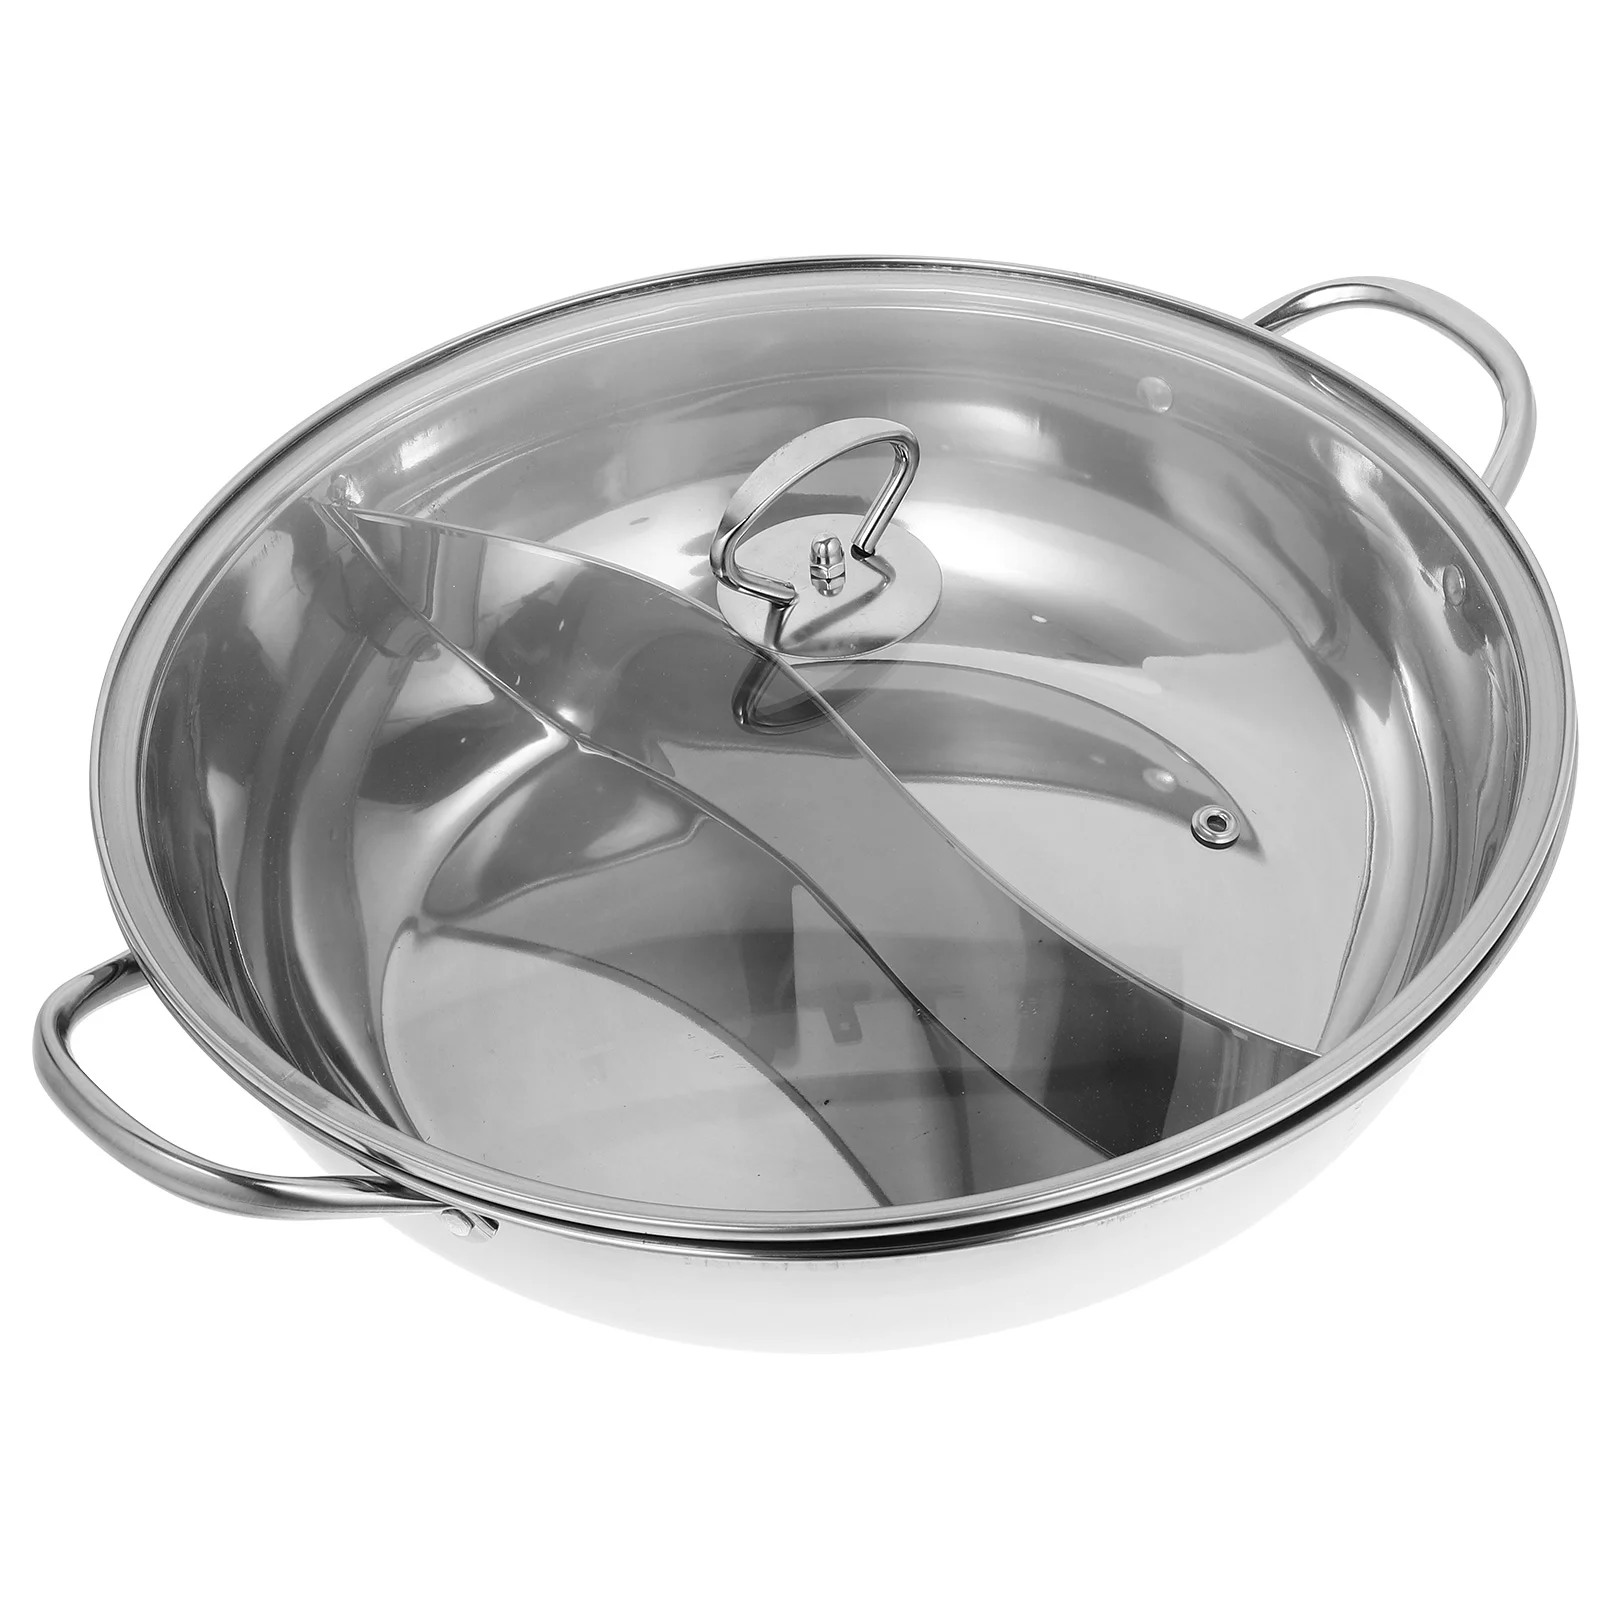 

Stainless Steel Stock Pot Kitchen Hot Divided Pan Hotpot With Divider Restaurant Soup Multi-purpose